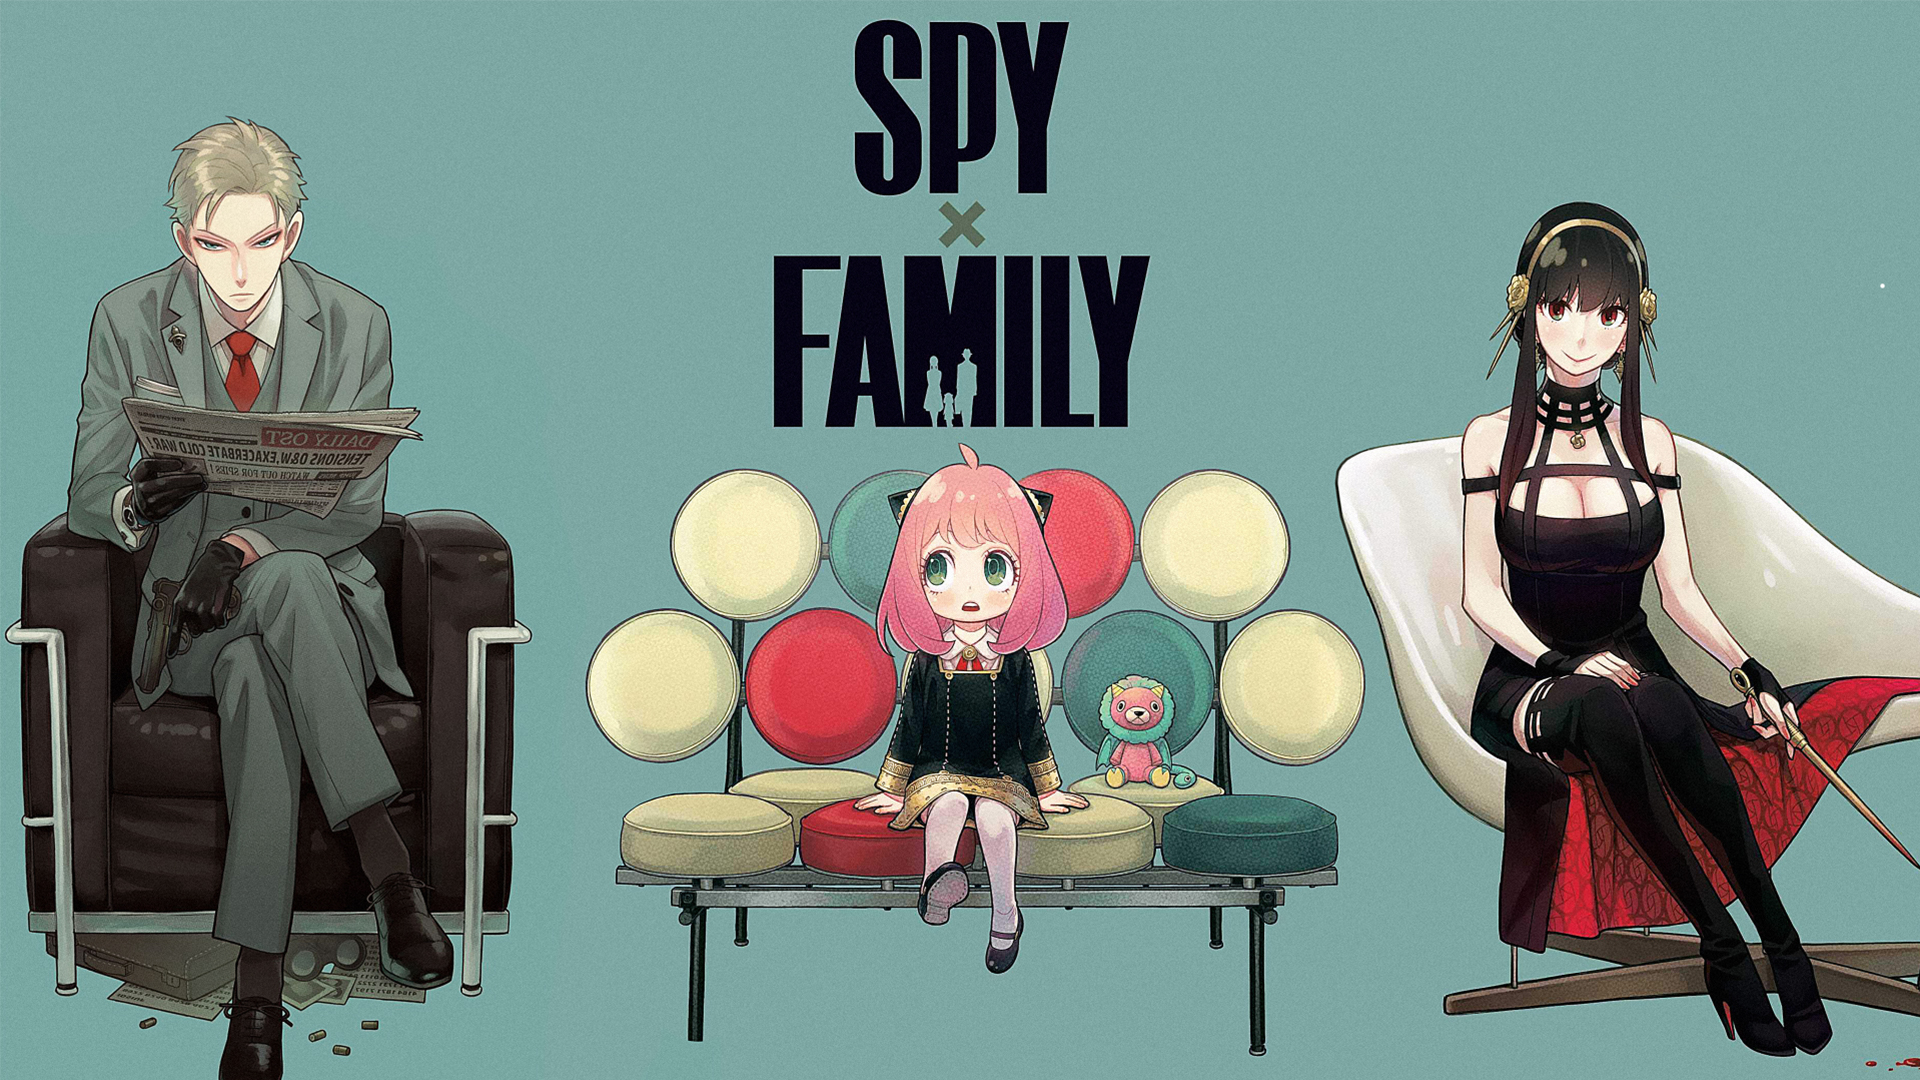 Why do young people initially fall in love with the Spy x Family manga?